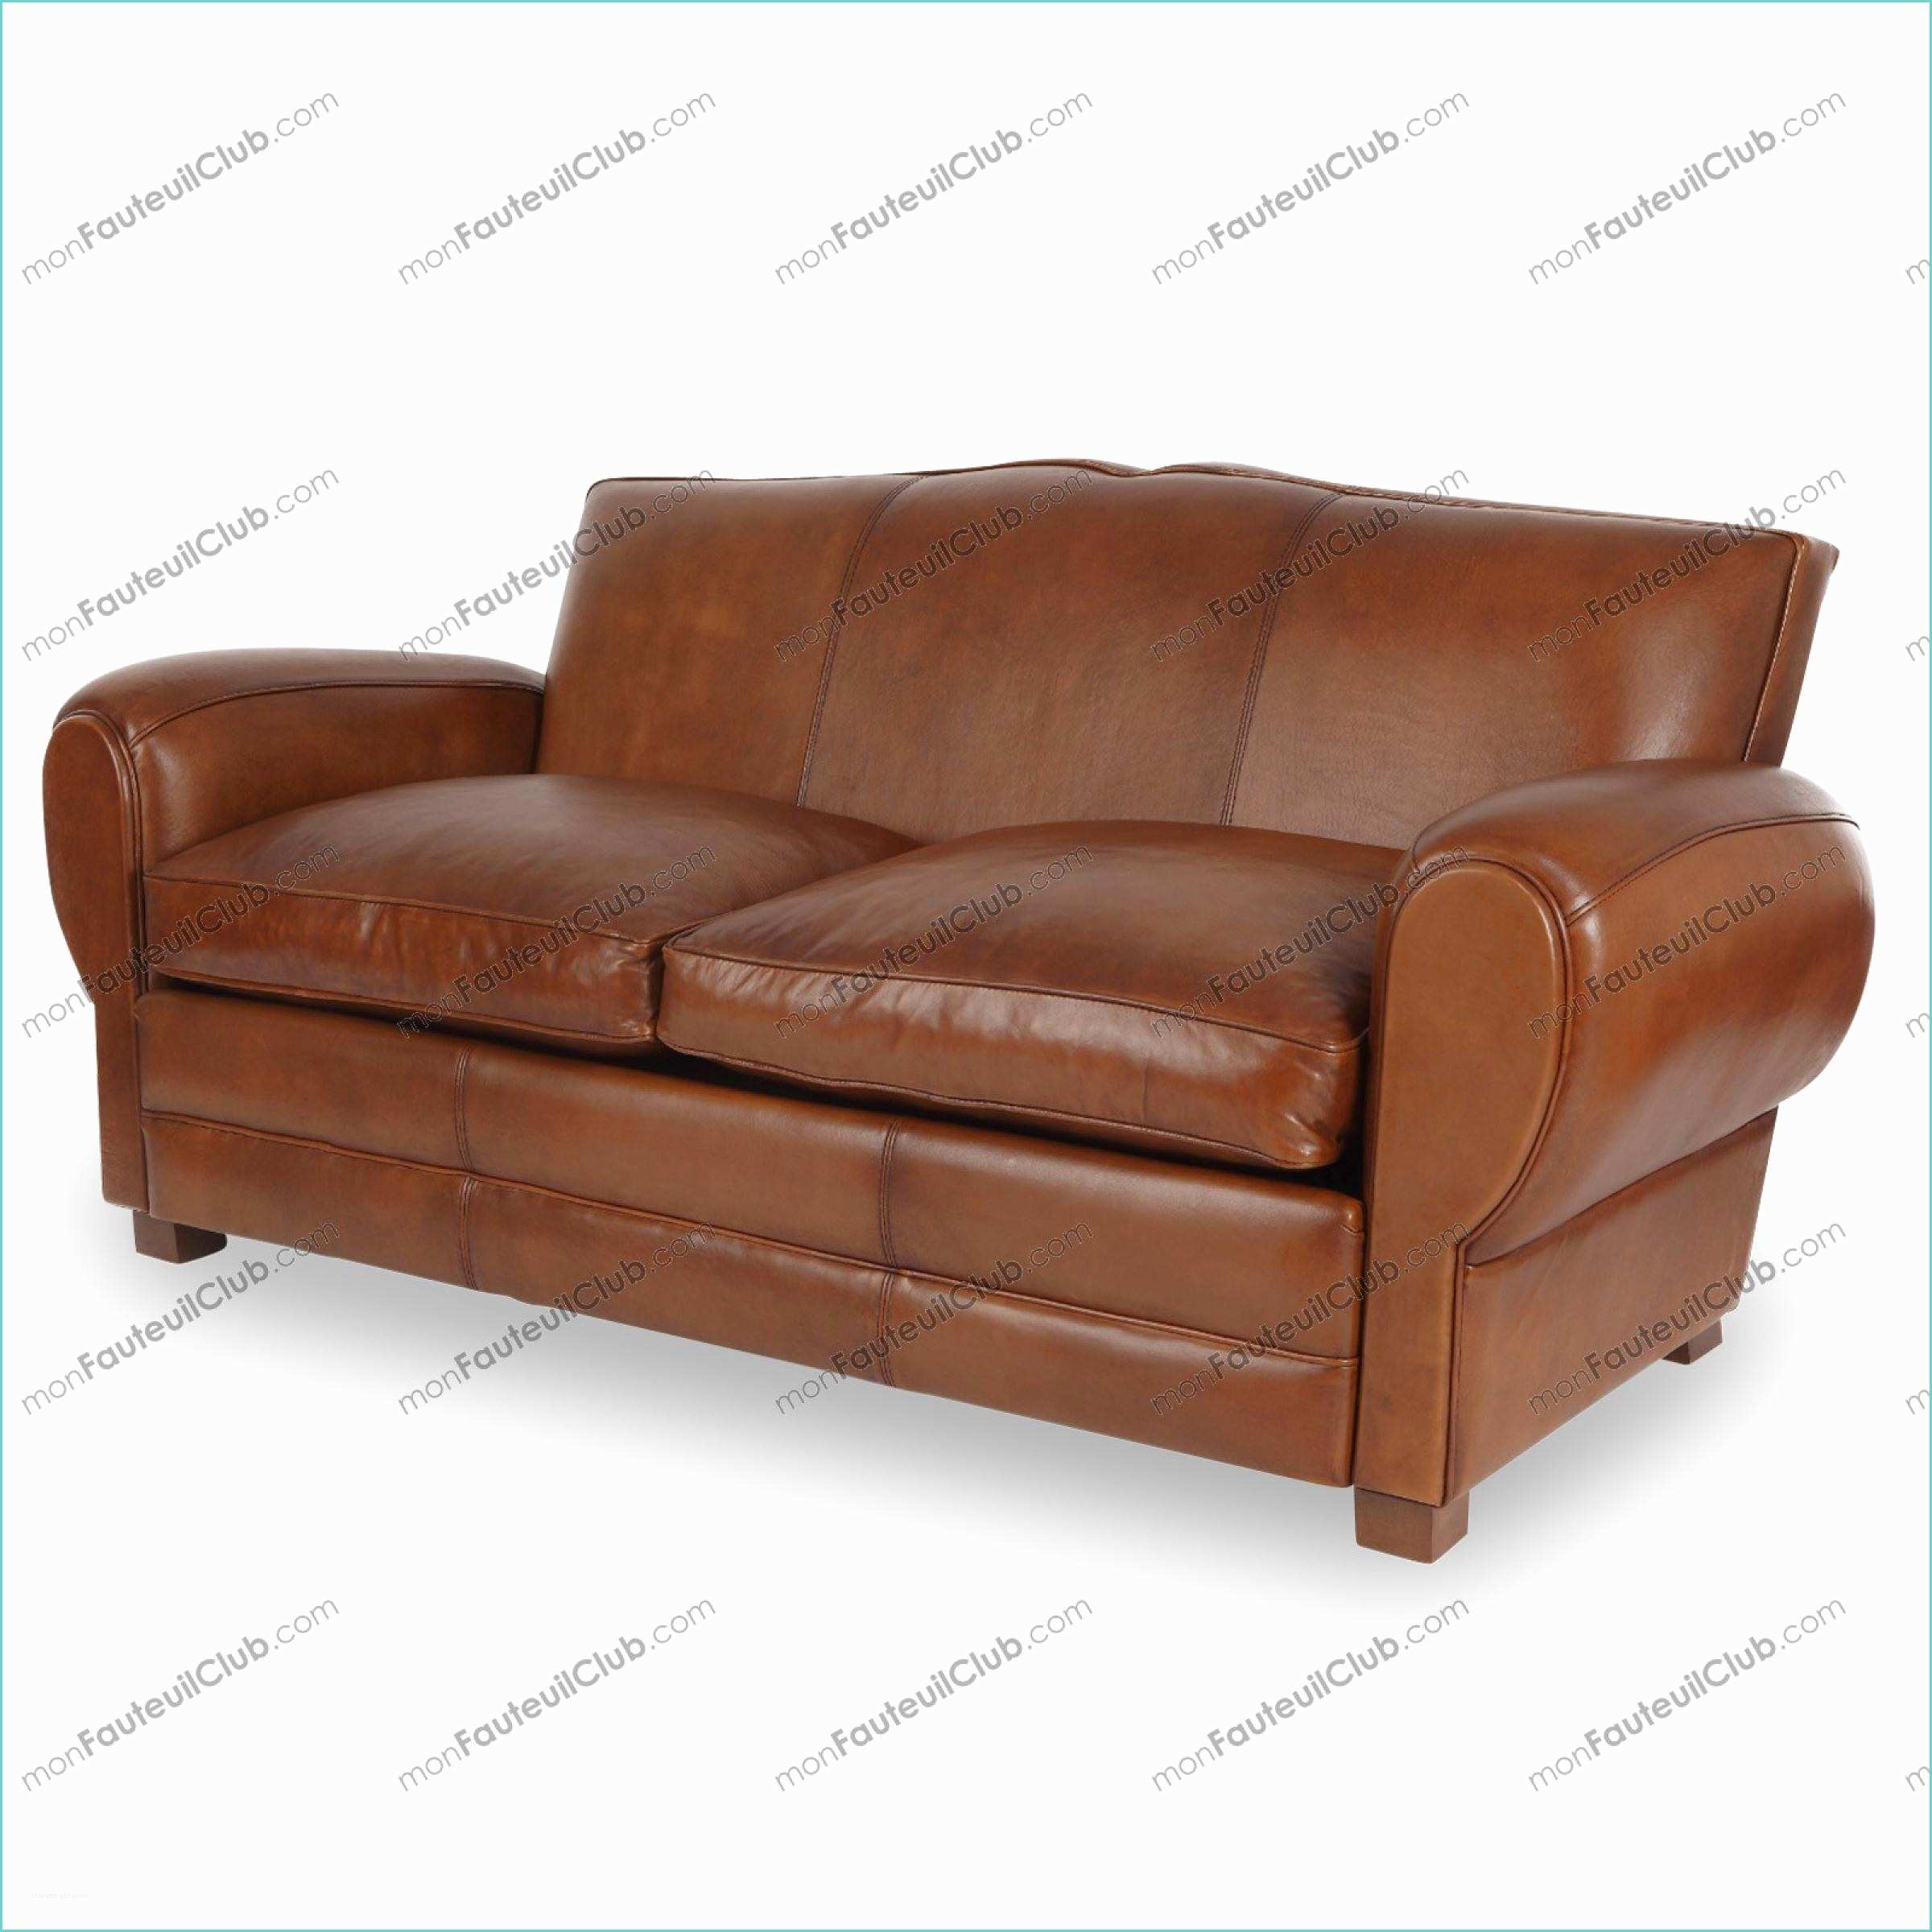 Canap Chesterfield Occasion Le Bon Coin Canapé Cuir Convertible Occasion 140 Canape Cuir